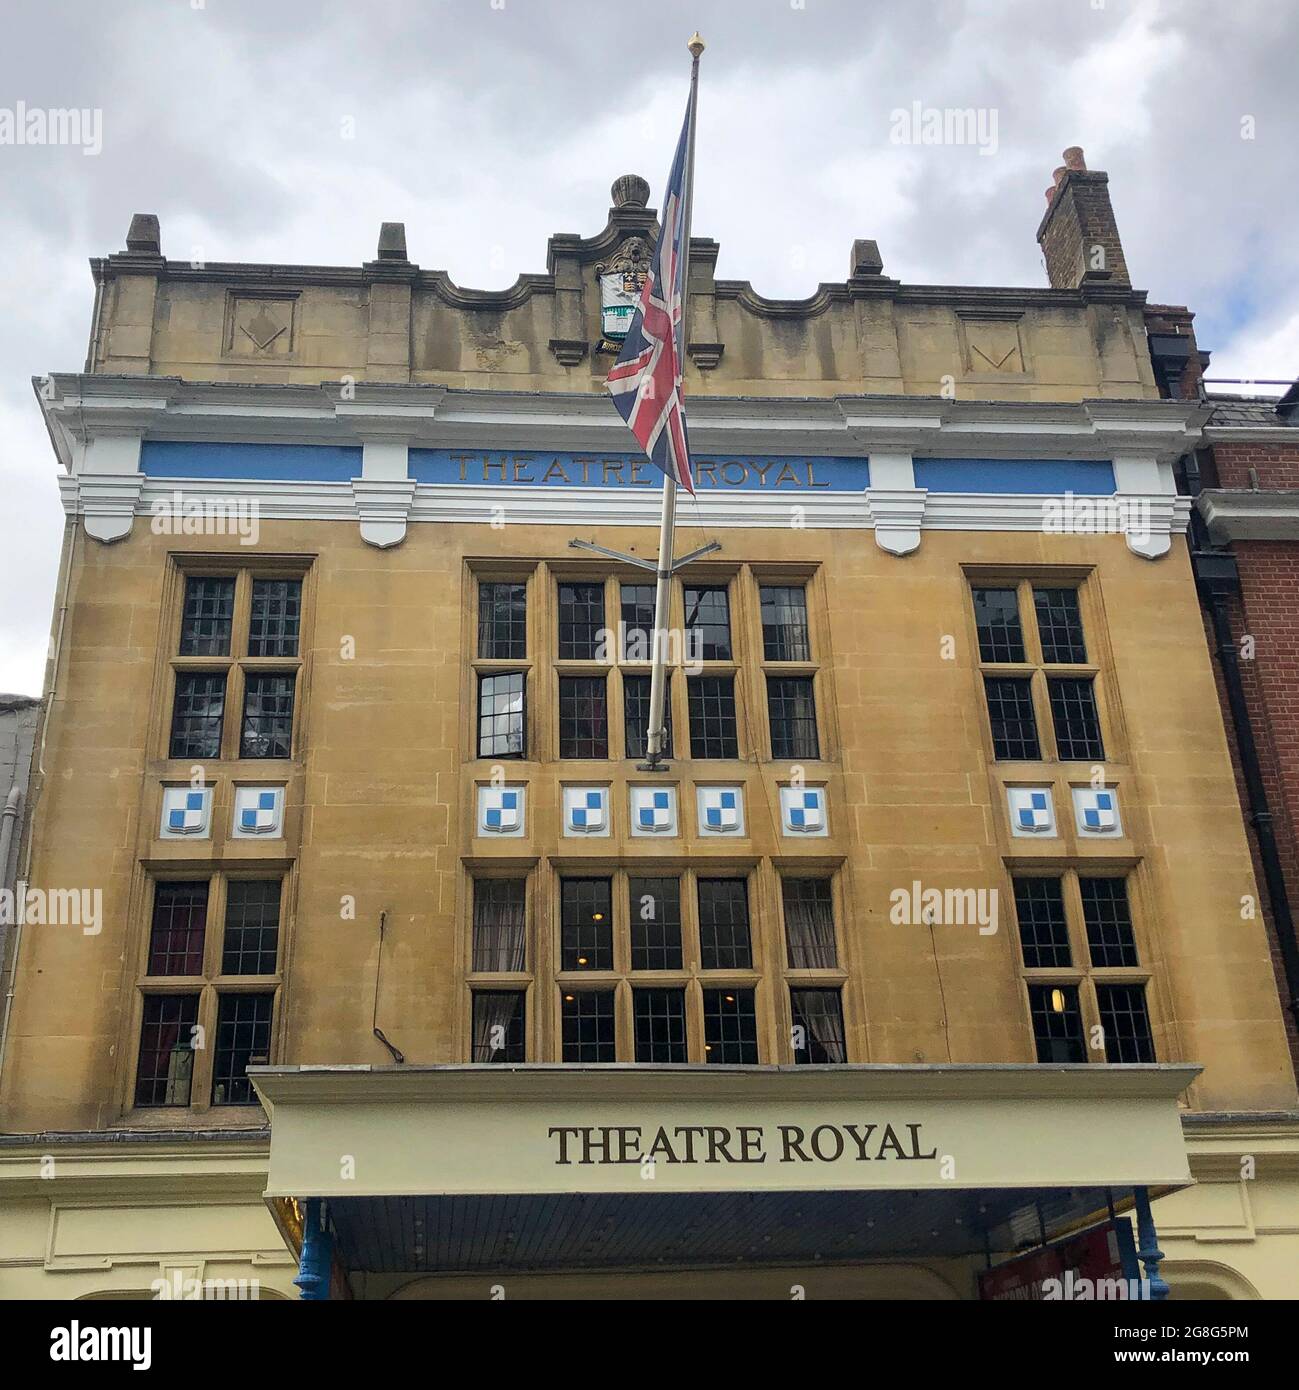 upper front facade of the Theatre Royal Windsor, Berkshire, England. A Grade II listed building, designed by Frank Verity in the early English Renaissance style, it opened in 1910. It has been managed by producer Bill Kenwright since 1997. Stock Photo